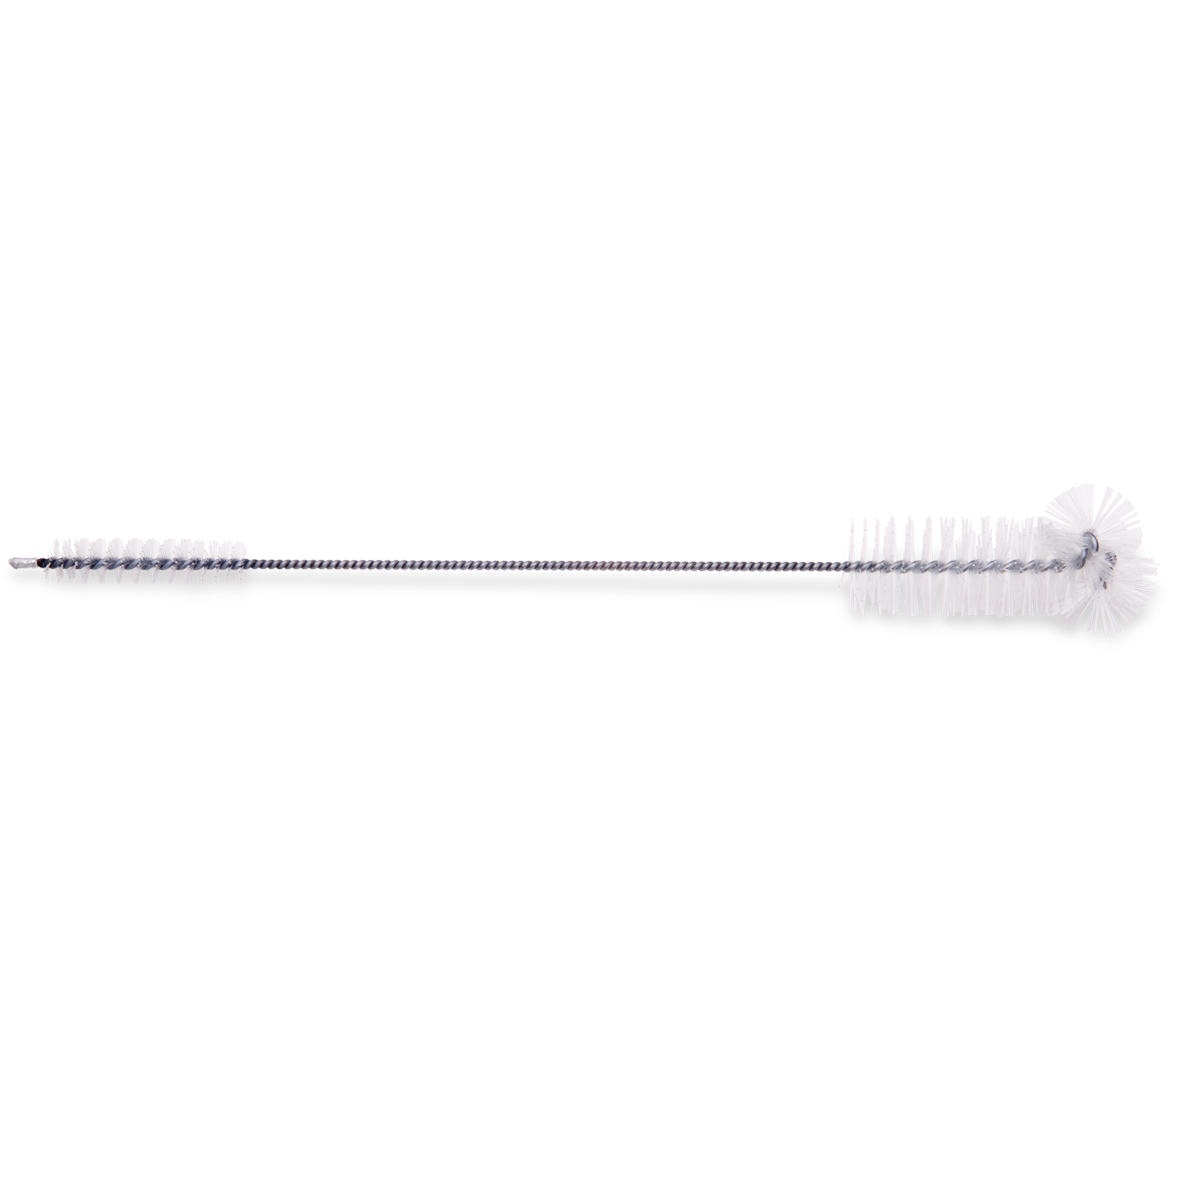 br_5450 sterilizer drain cleaning brush